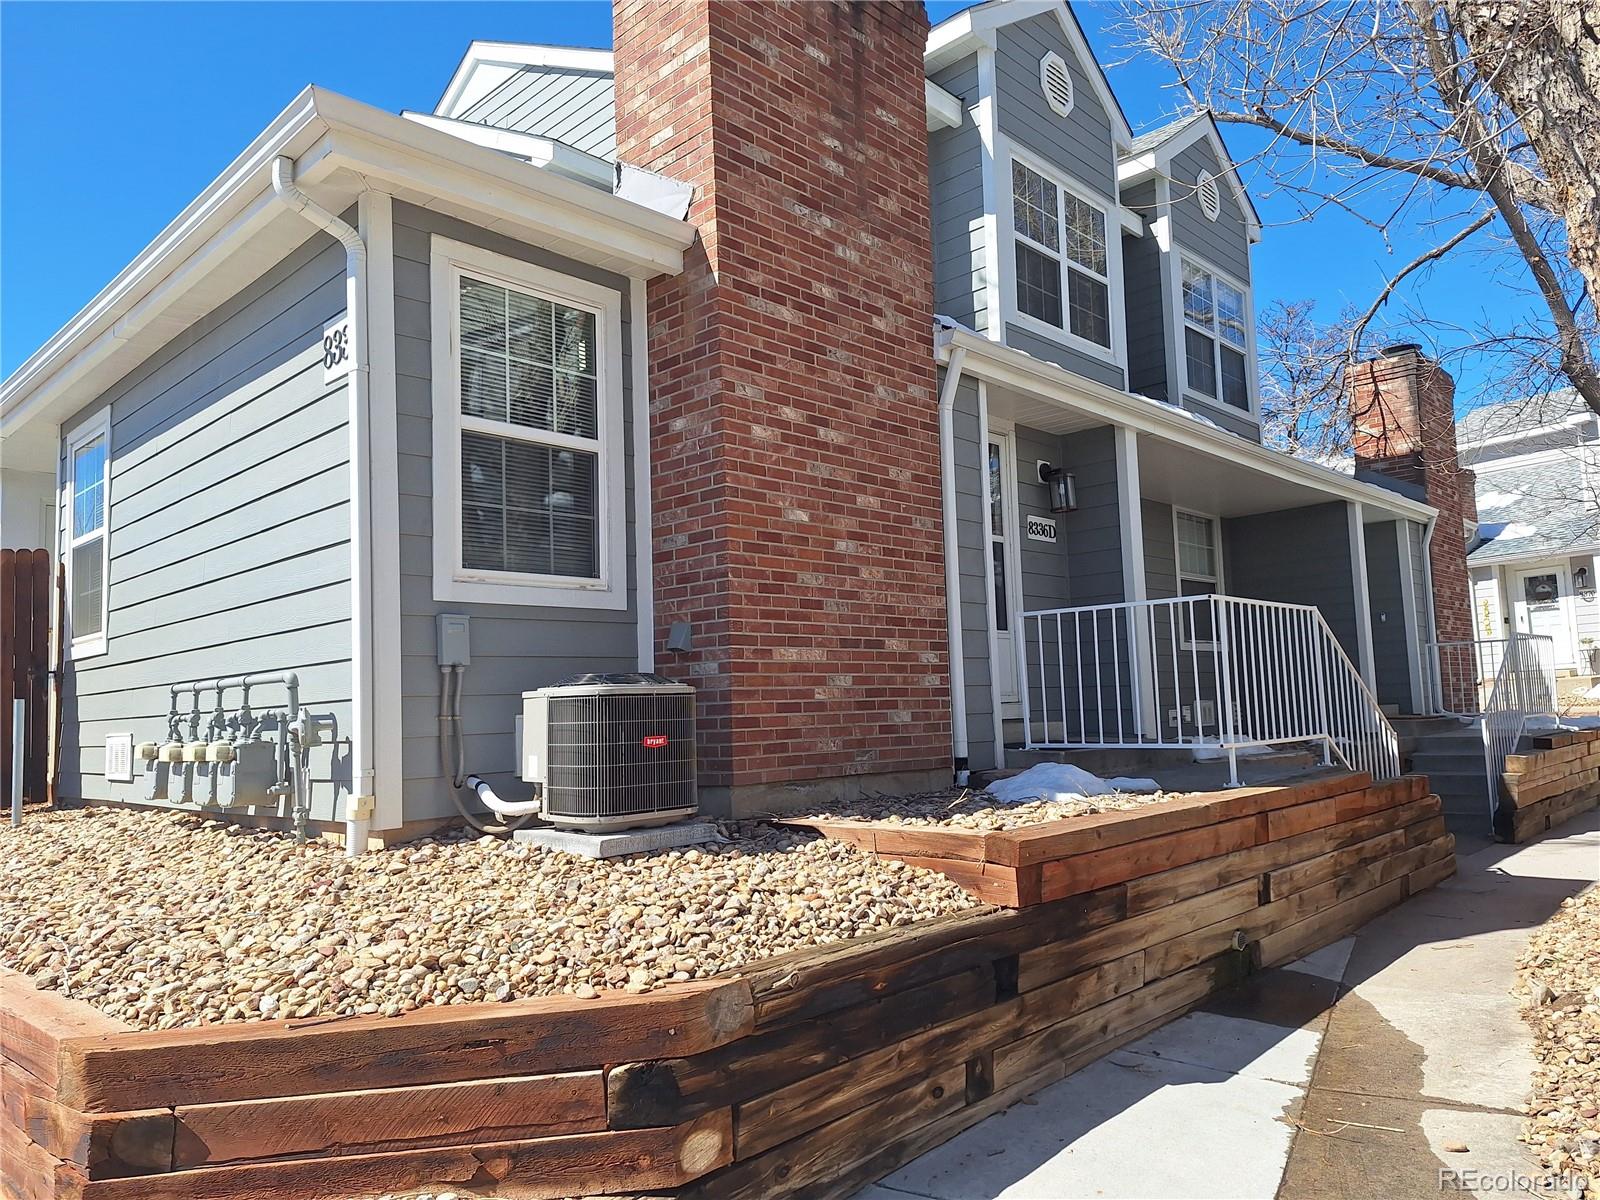 8336 W 87th Drive D, Arvada  MLS: 2650336 Beds: 2 Baths: 2 Price: $389,500